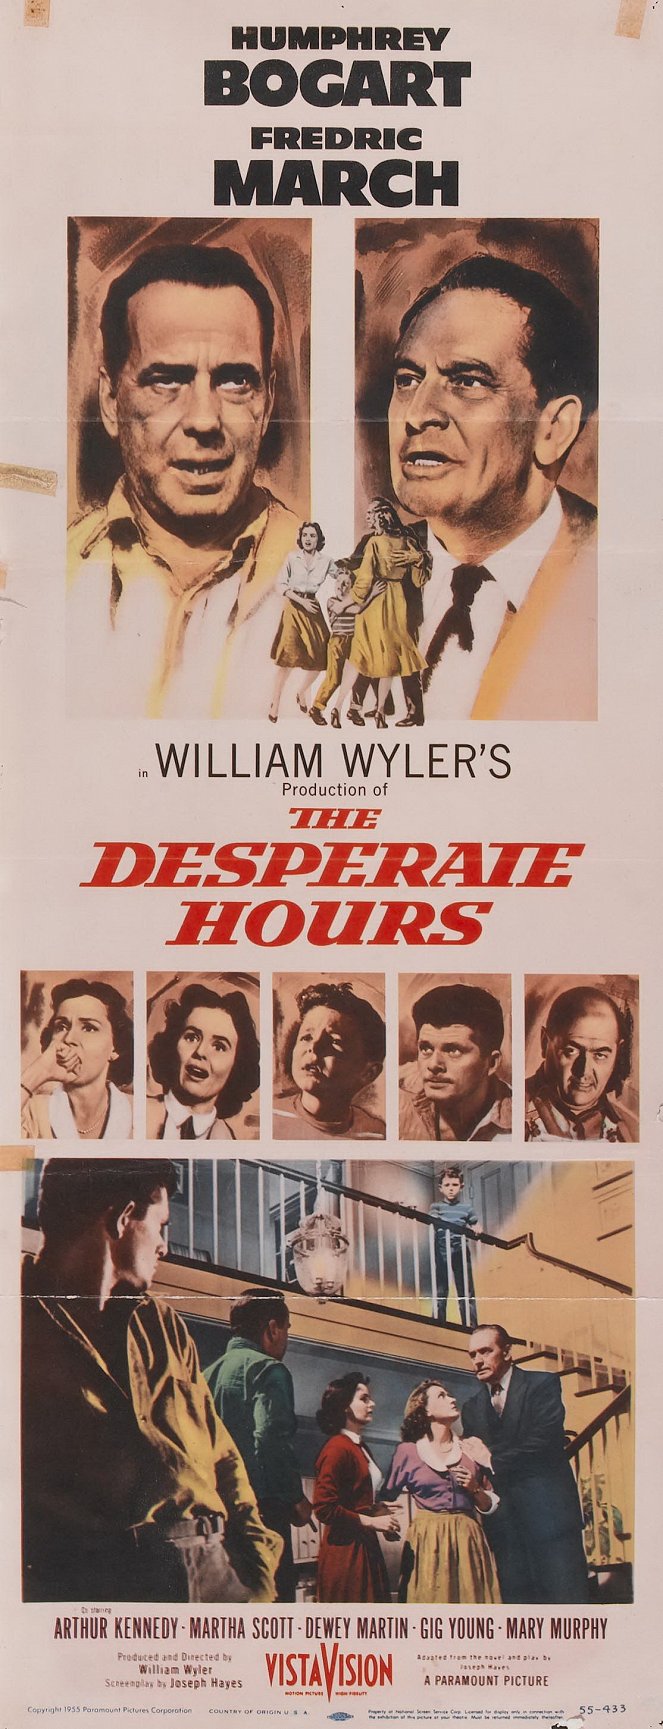 The Desperate Hours - Posters